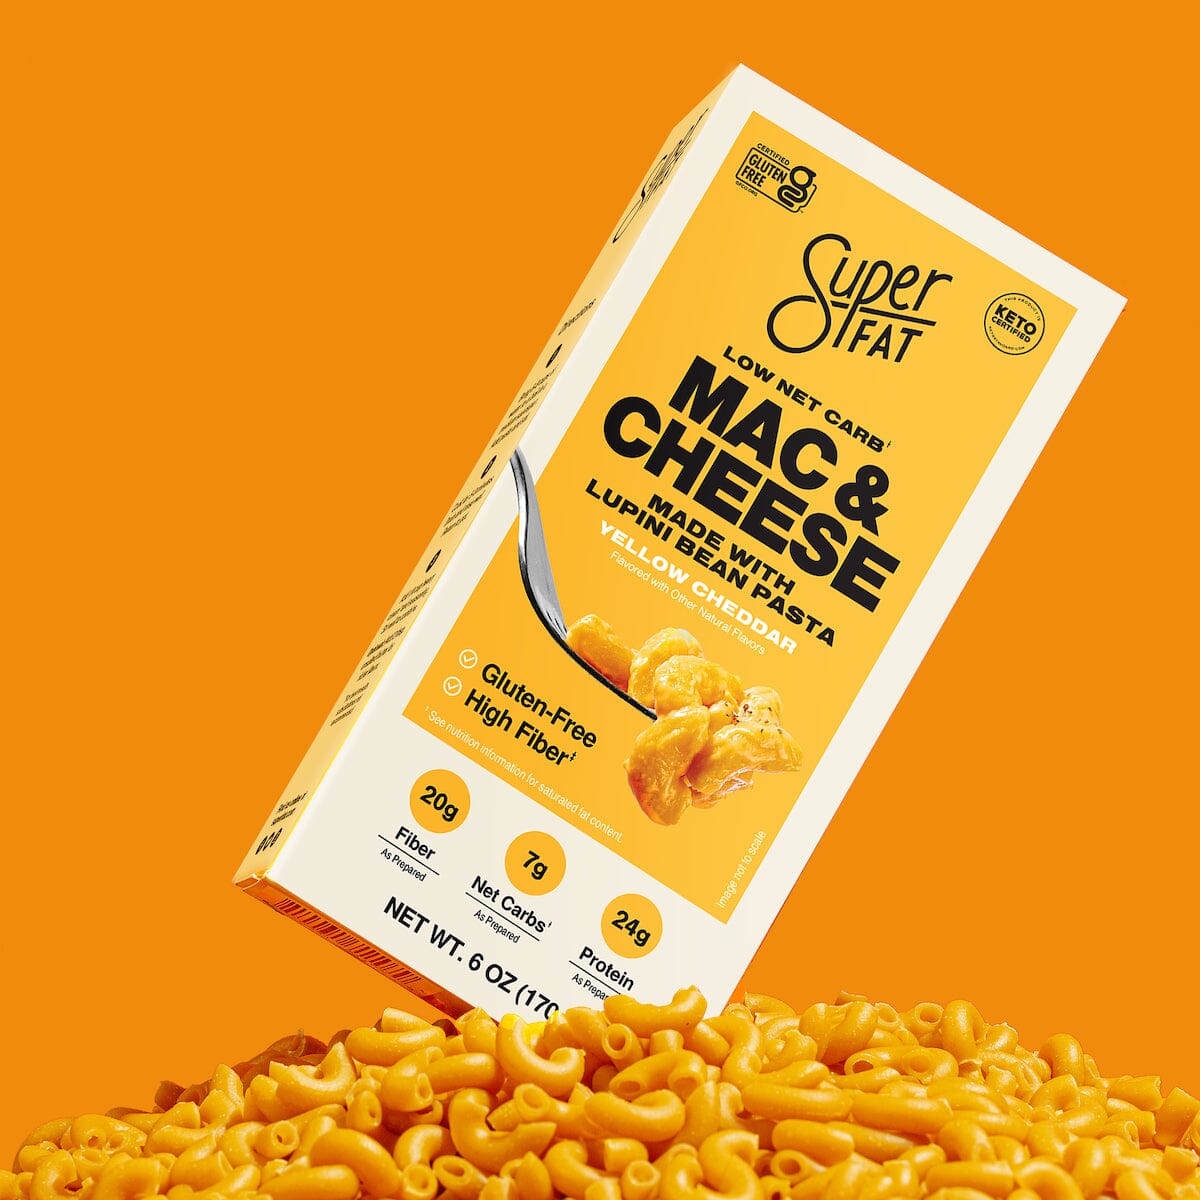 LAST CHANCE SuperFat Keto Mac & Cheese - Up to 45% Off!